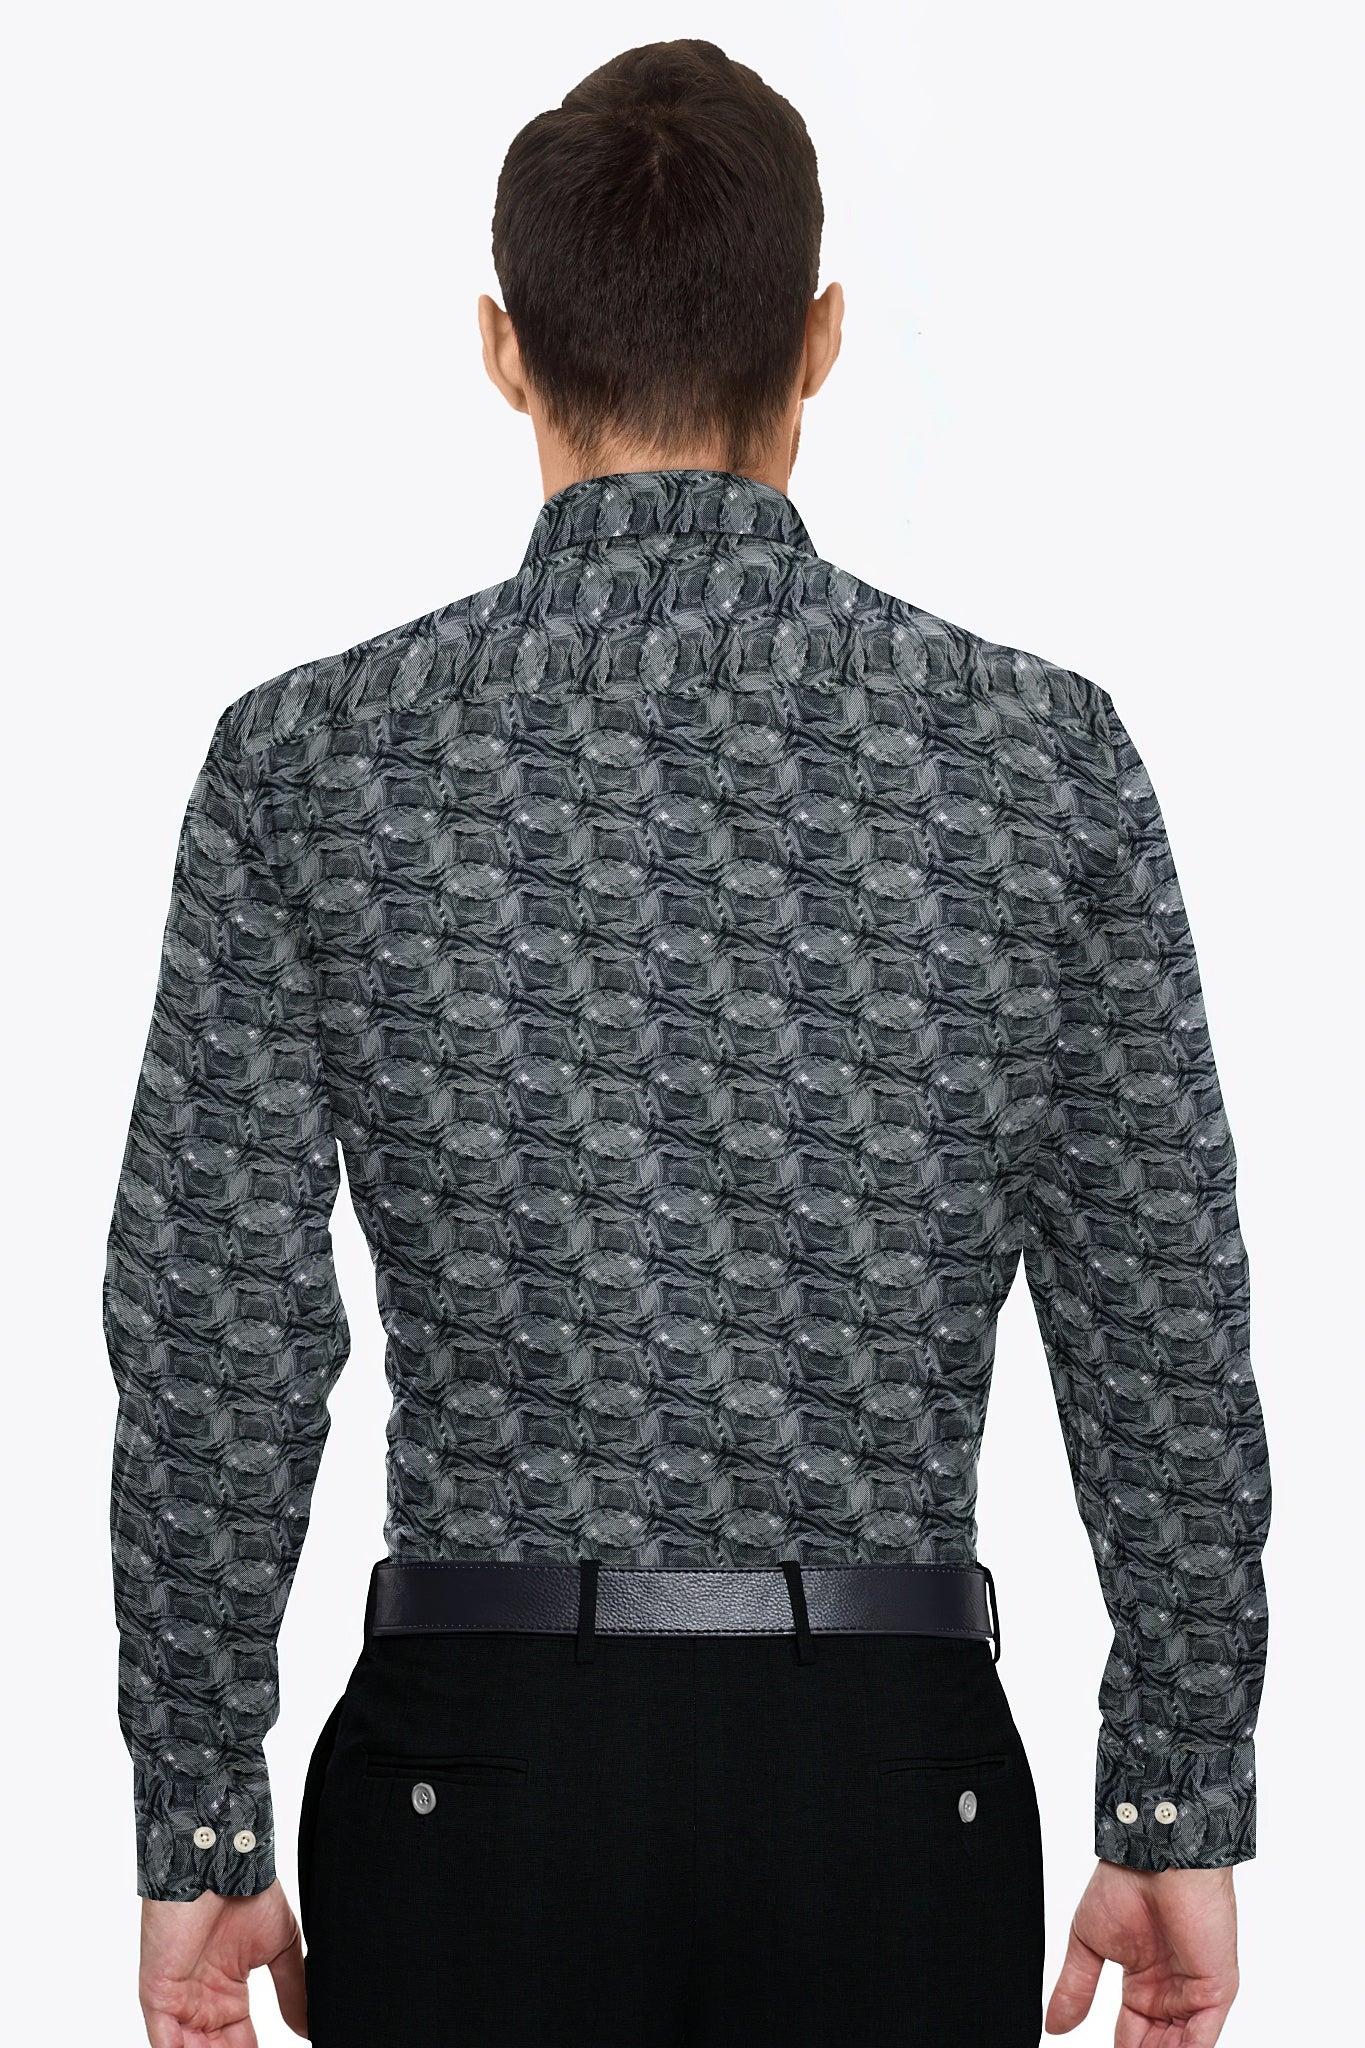 Black and Grey Abstract Pattern Printed Cavalry Twill Men's Cotton Shirt